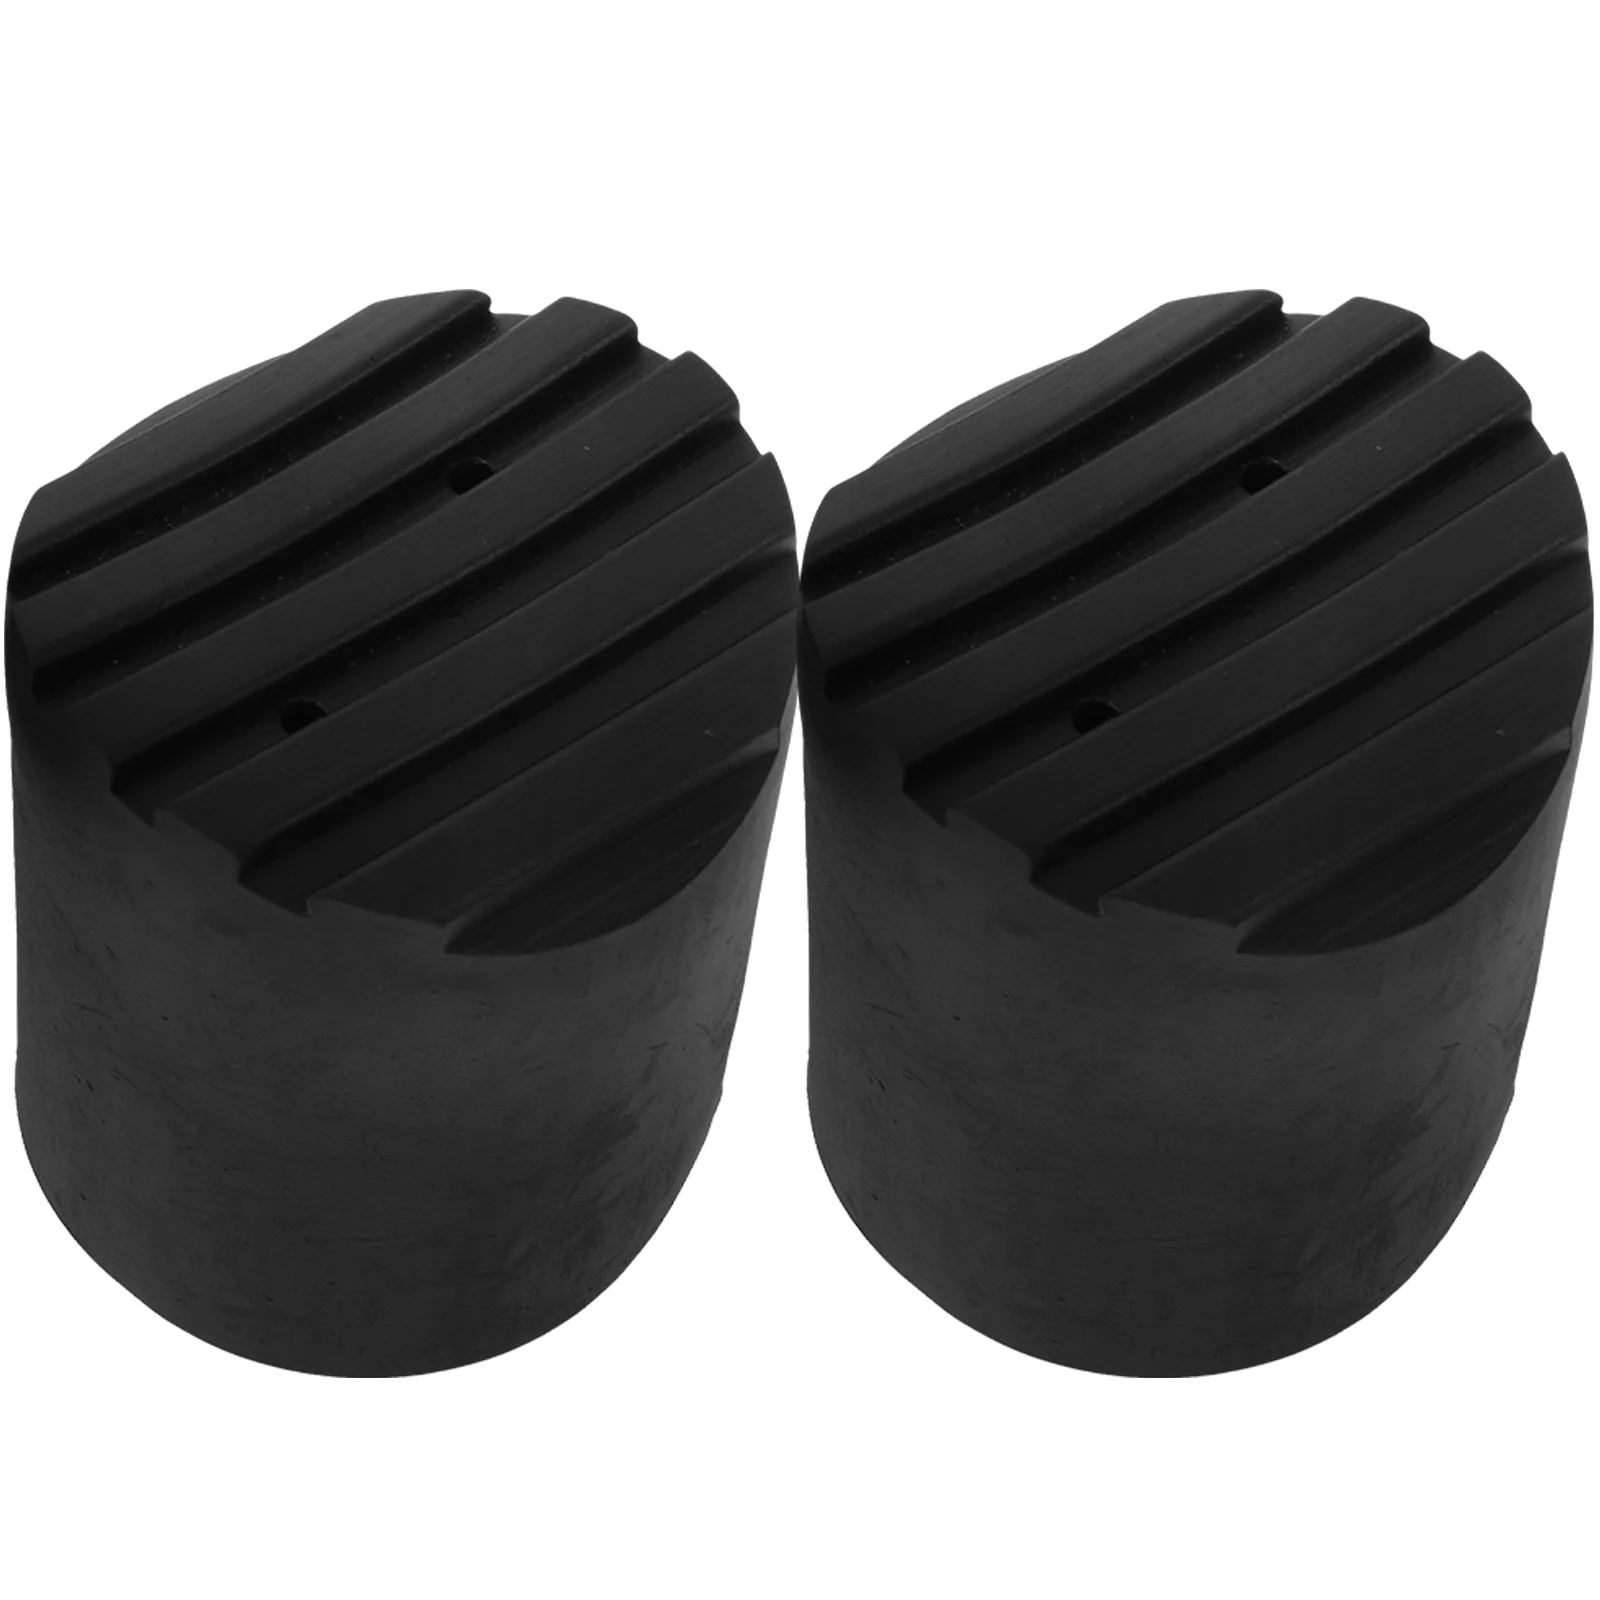 

2 Pcs An Fittings Rubber Tips Parts Foldable Ladder Feet Covers Replacement Boots Non-skid Anti-skid Foot